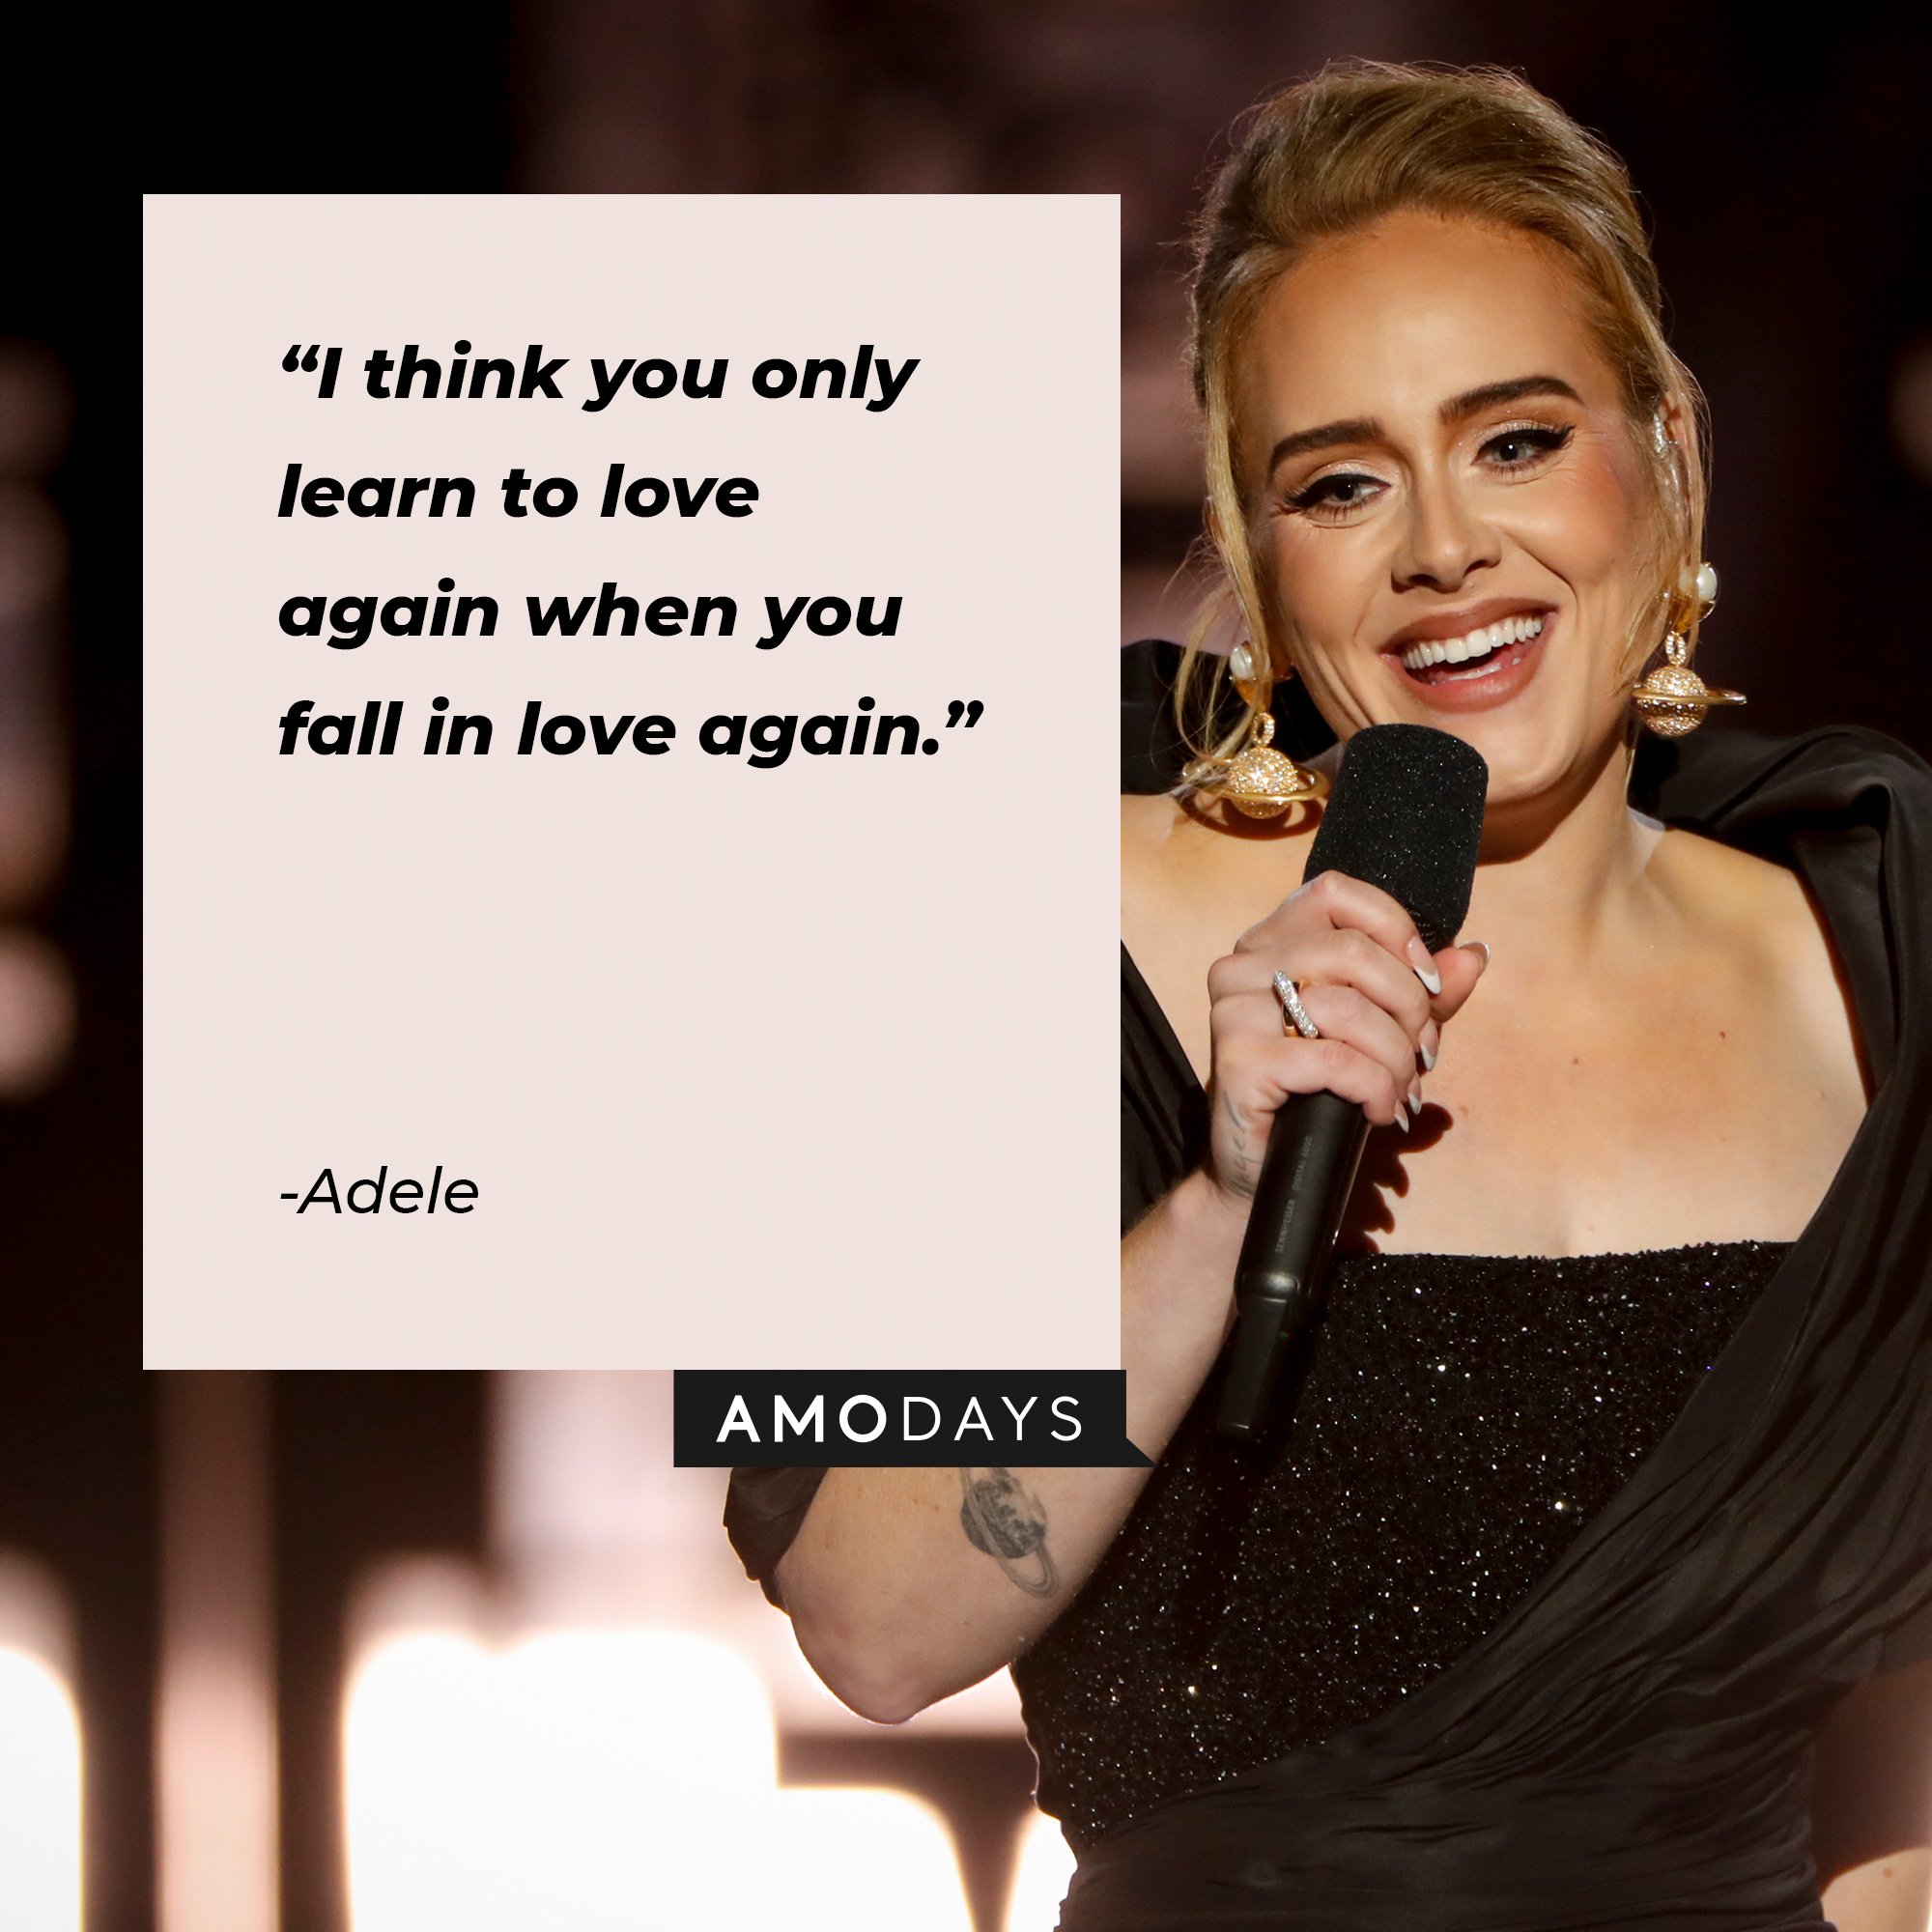 Adele’s quote: "I think you only learn to love again when you fall in love again."  |  Image: AmoDays